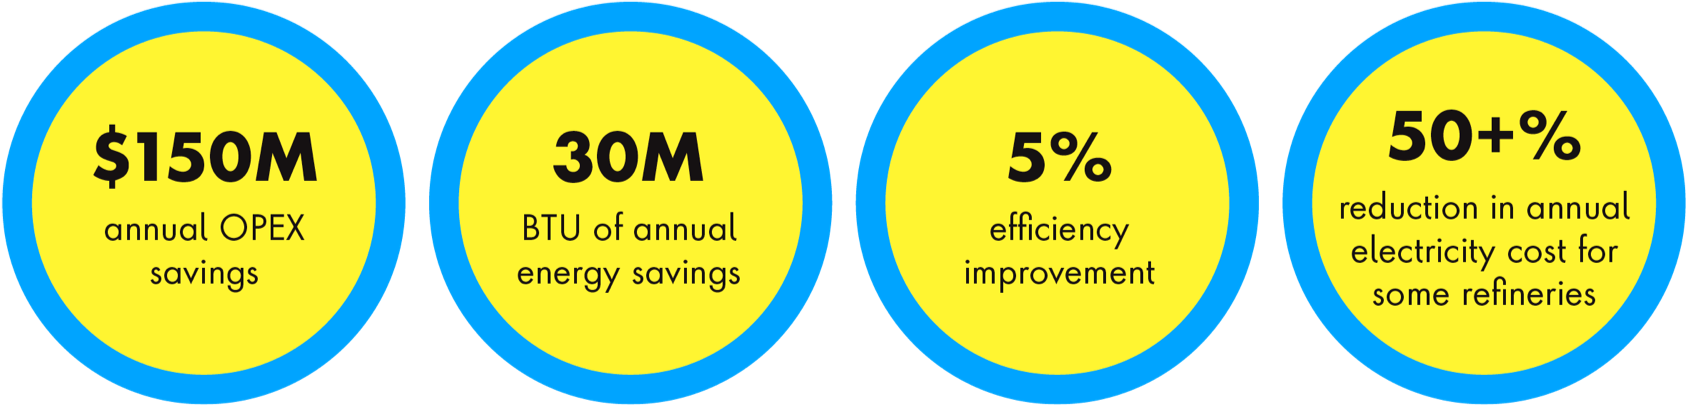 The result is $150 million in annual OPEX savings; $30 million BTU of annual energy savings, 5% efficiency improvement and more than 50% reduction in annual electricity cost for some refineries. 